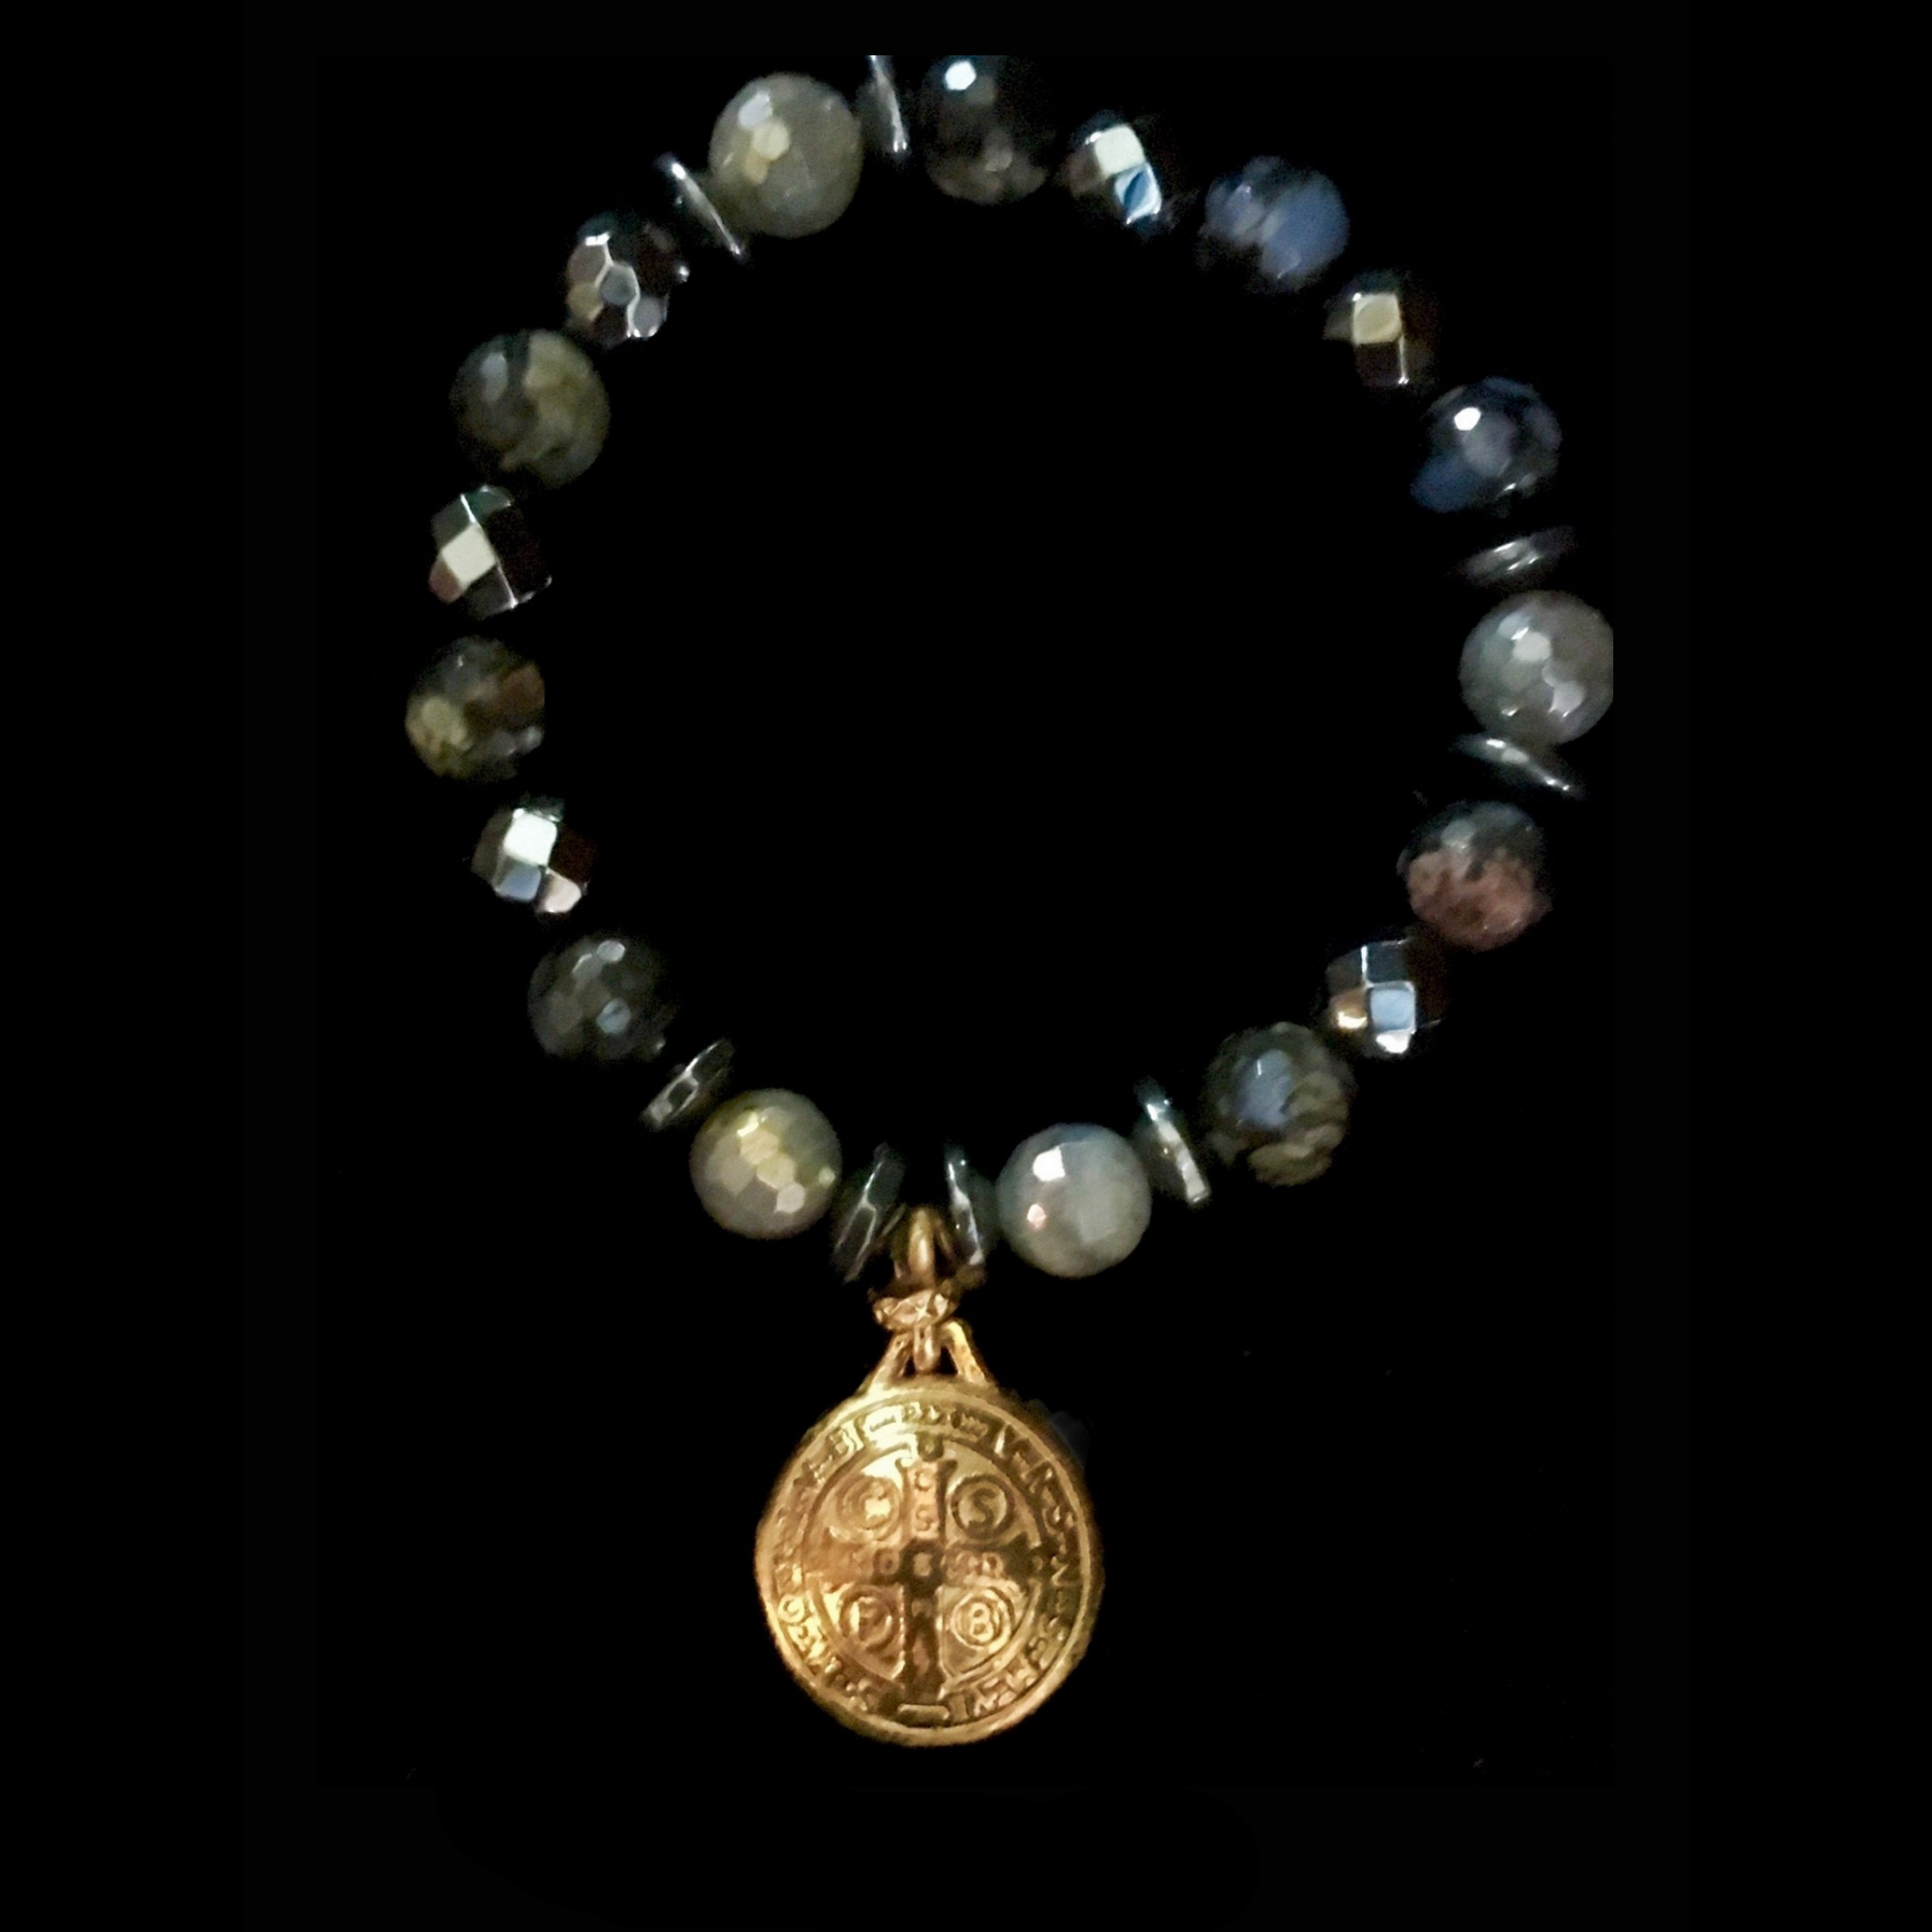 San Benito Medal  Enlightenment Bracelet in Galaxy Mix